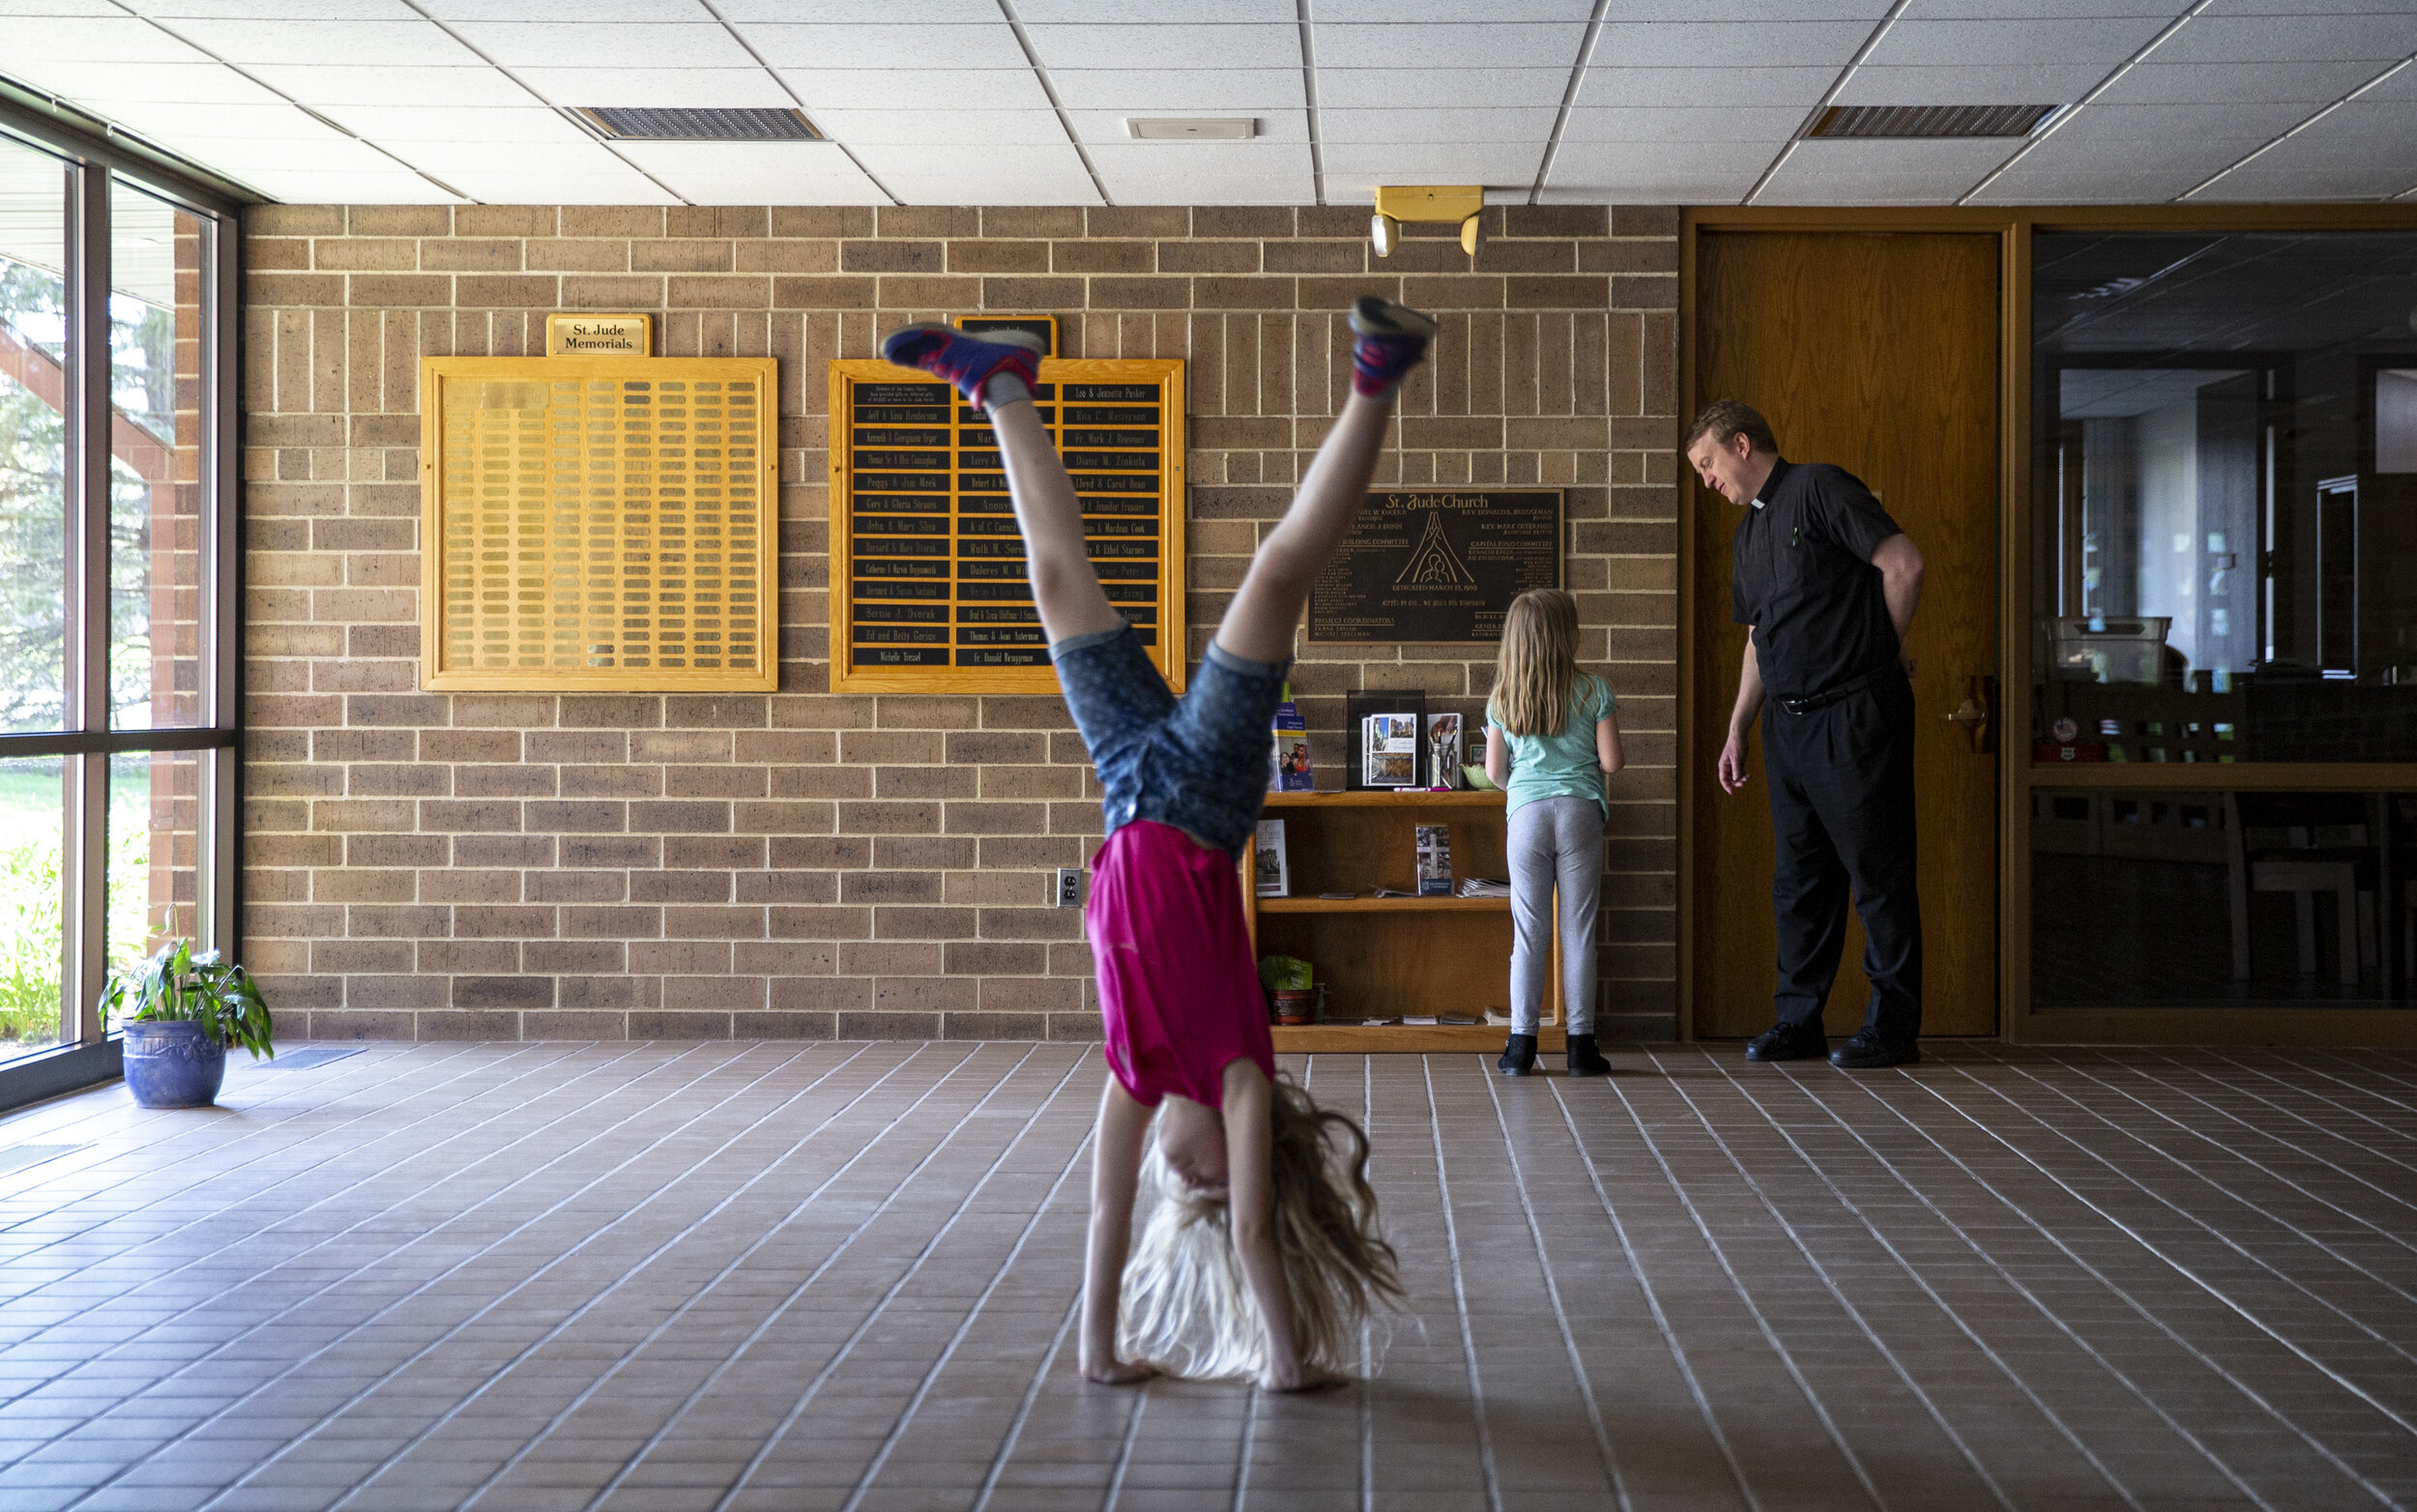  Rev. Mark Murphy talks with Eva Hutchins, 7, as her older sister, Lizzie, 10, does a cartwheel in the lobby at St. Jude’s Catholic Church in Cedar Rapids on Tuesday. The Hutchins’ five daughters had been homeschooling and had not left the house much